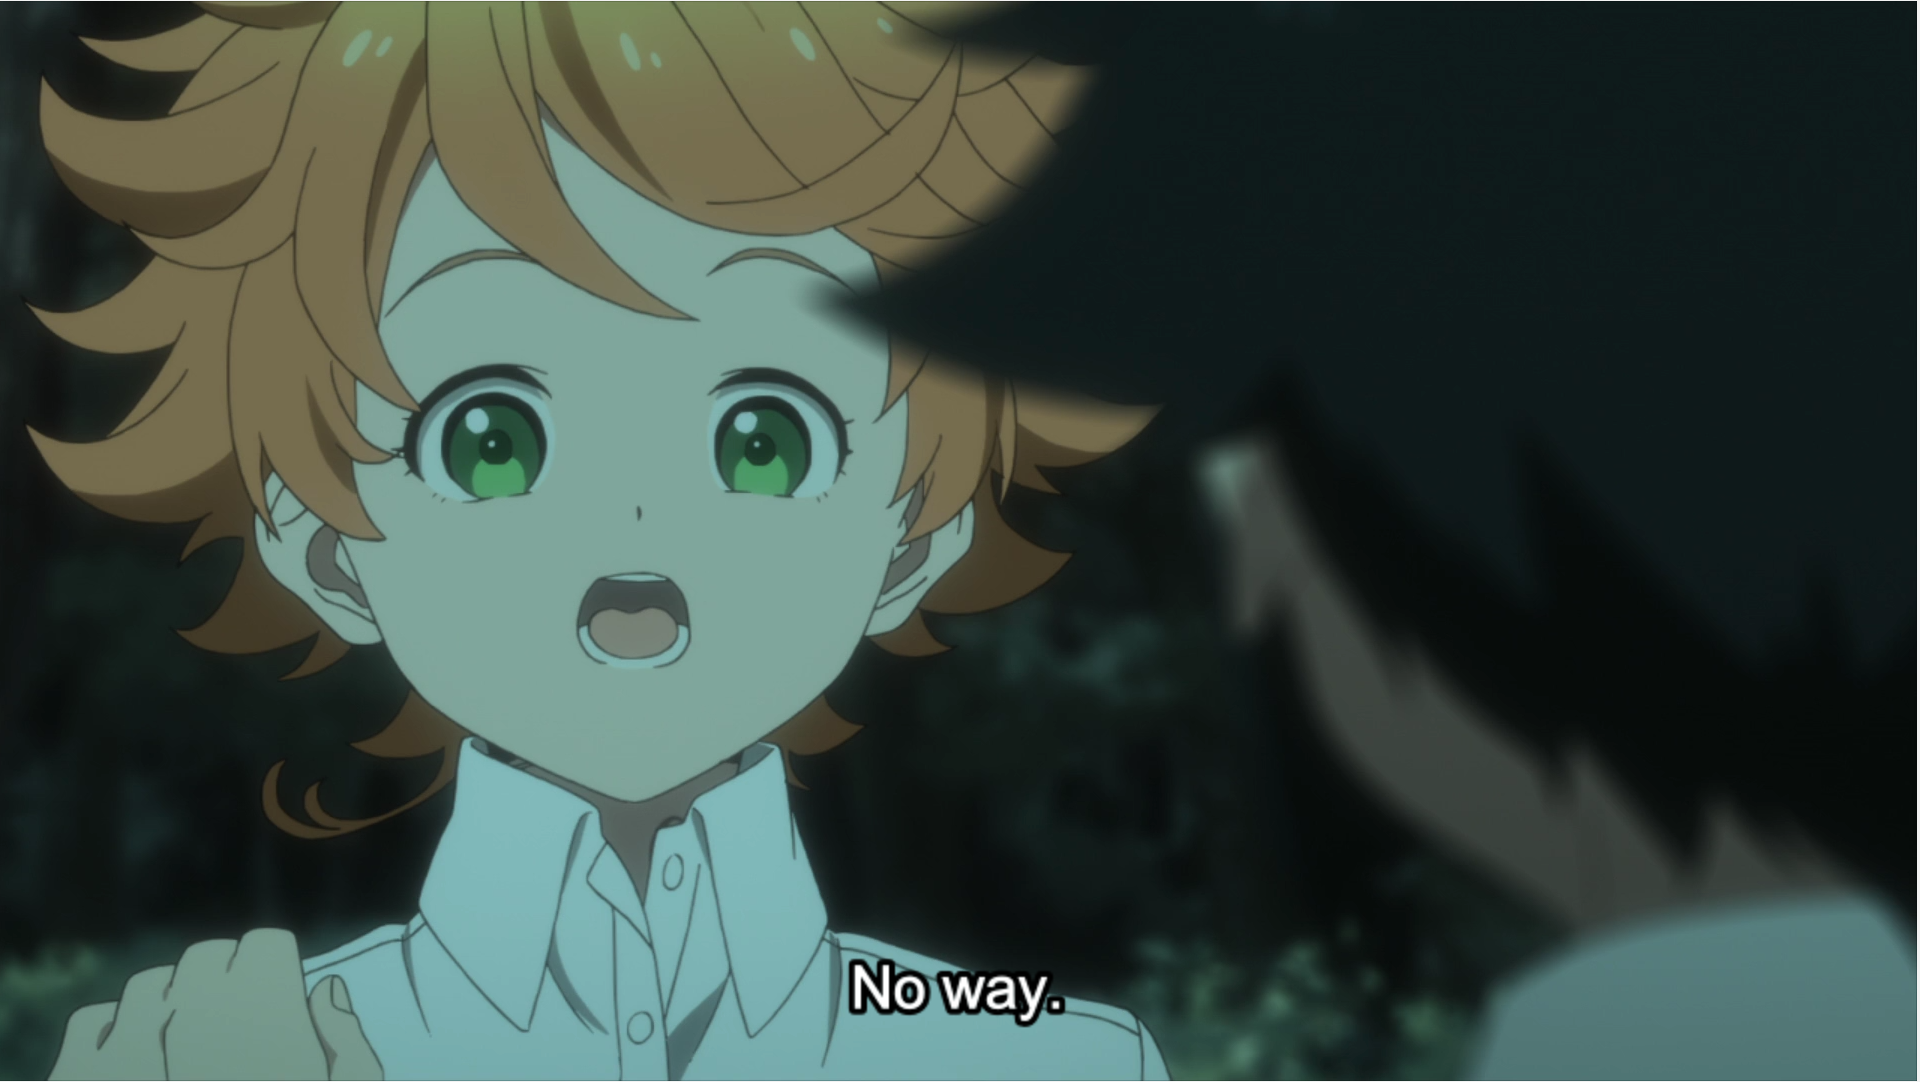 Anime/manga recommendation: The Promised Neverland, by Christina Chen